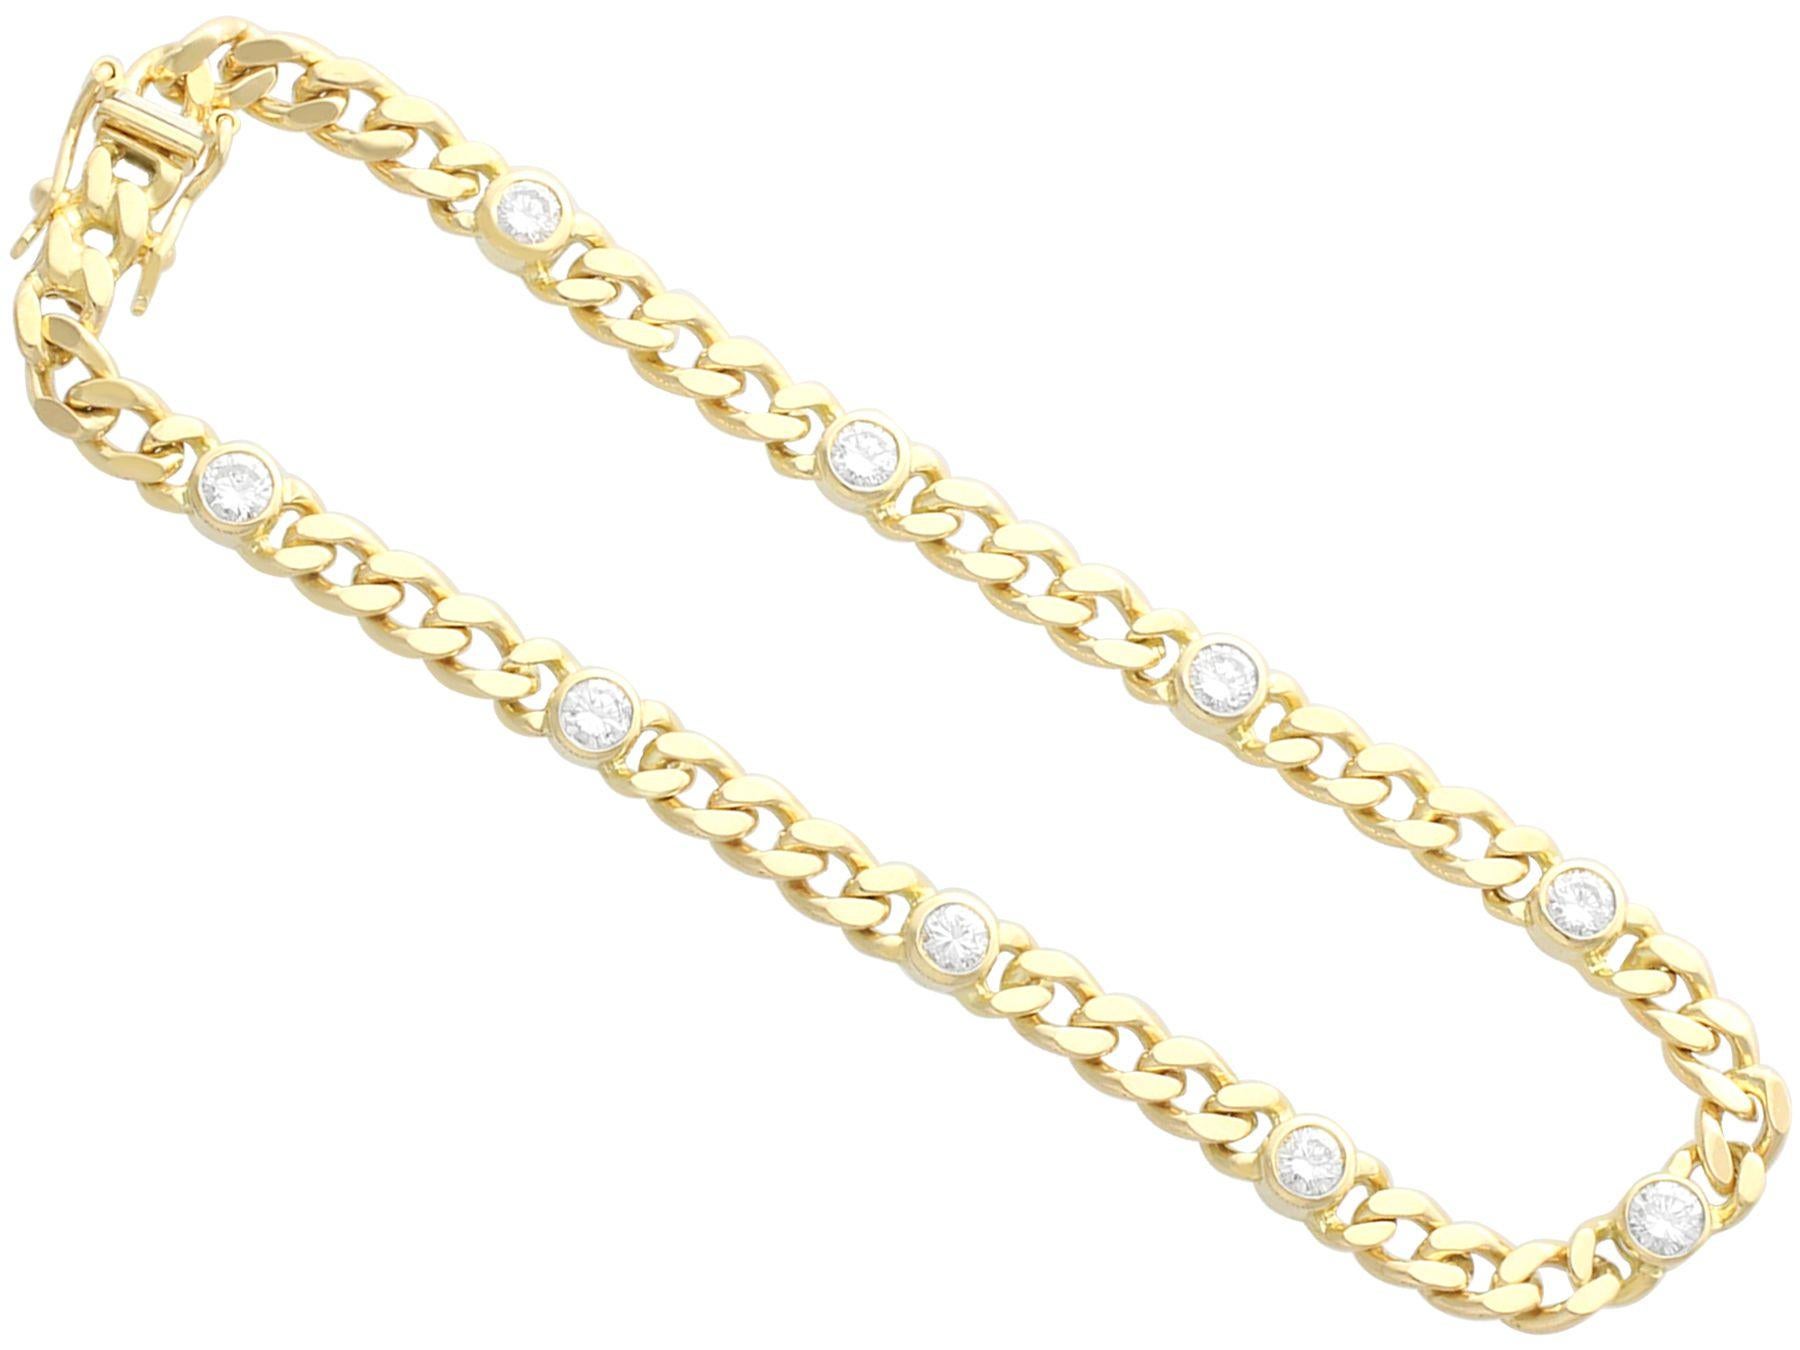 A fine and impressive 1.10 carat diamond bracelet in 18 karat yellow gold; part of our diverse antique jewelry and estate jewelry collections

This fine and impressive vintage bracelet has been crafted in 18 karat yellow gold.

The bracelet is